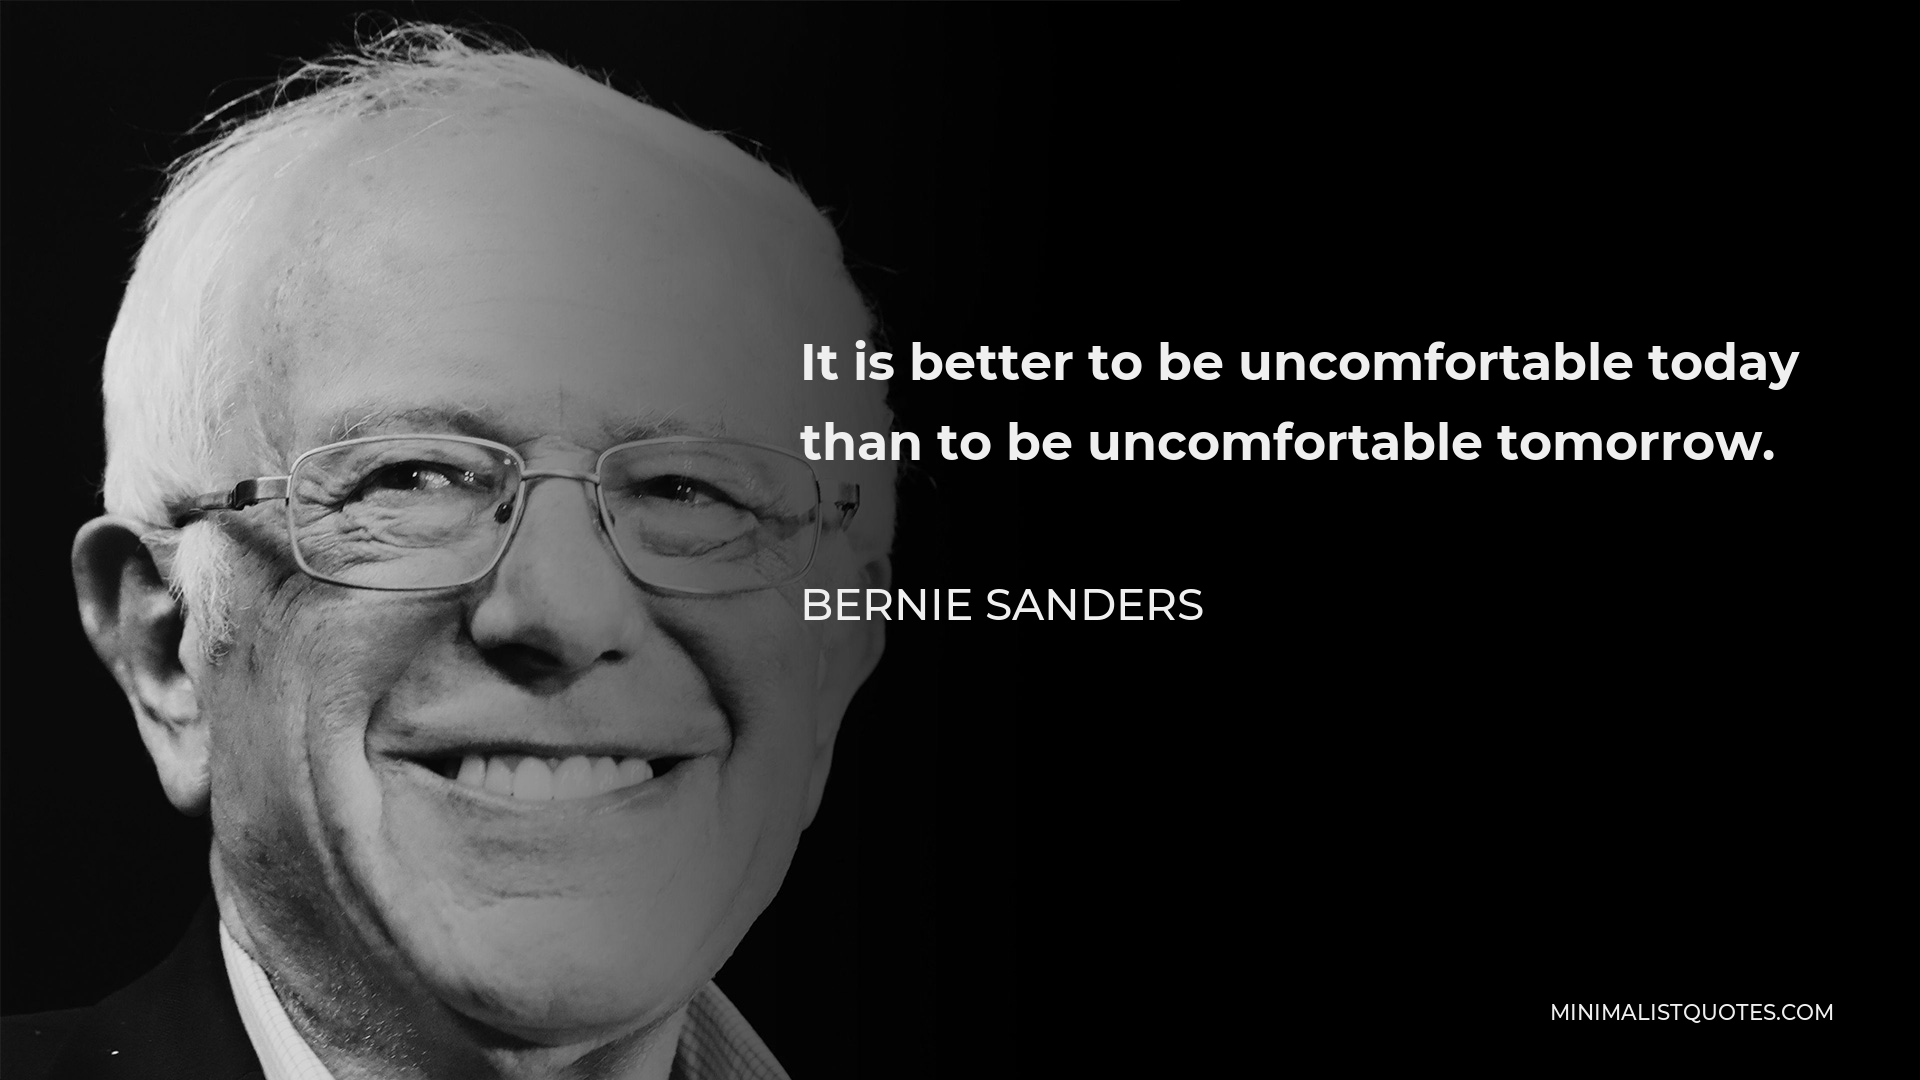 Bernie Sanders Quote - It is better to be uncomfortable today than to be uncomfortable tomorrow.